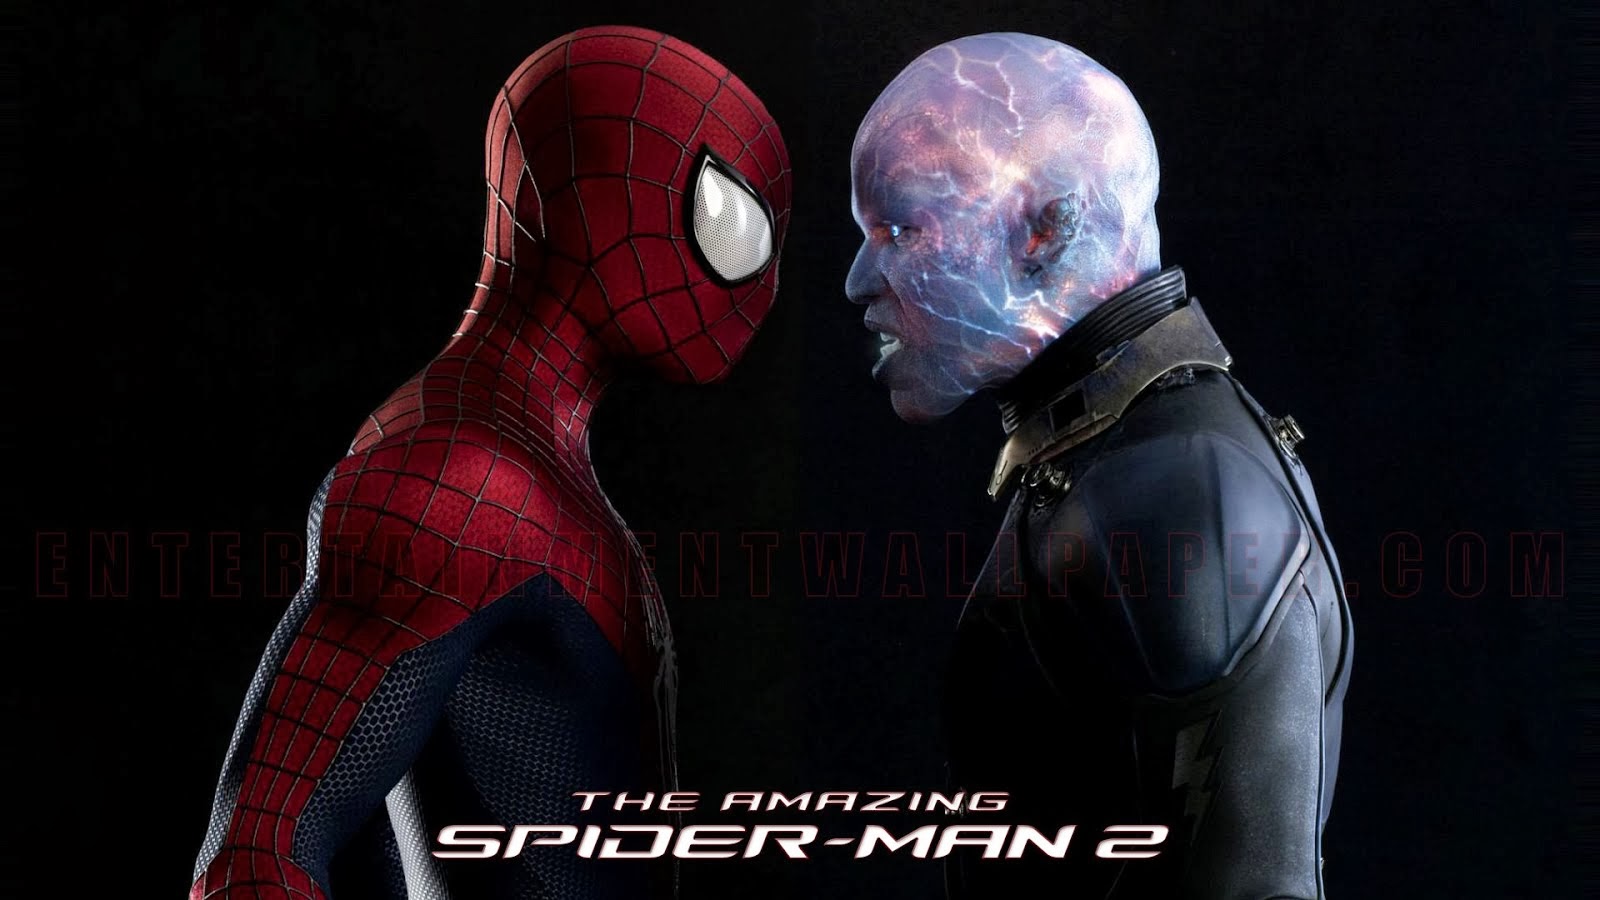 The Amazing Spider-man 2 (Releasing on May 2, 2014)